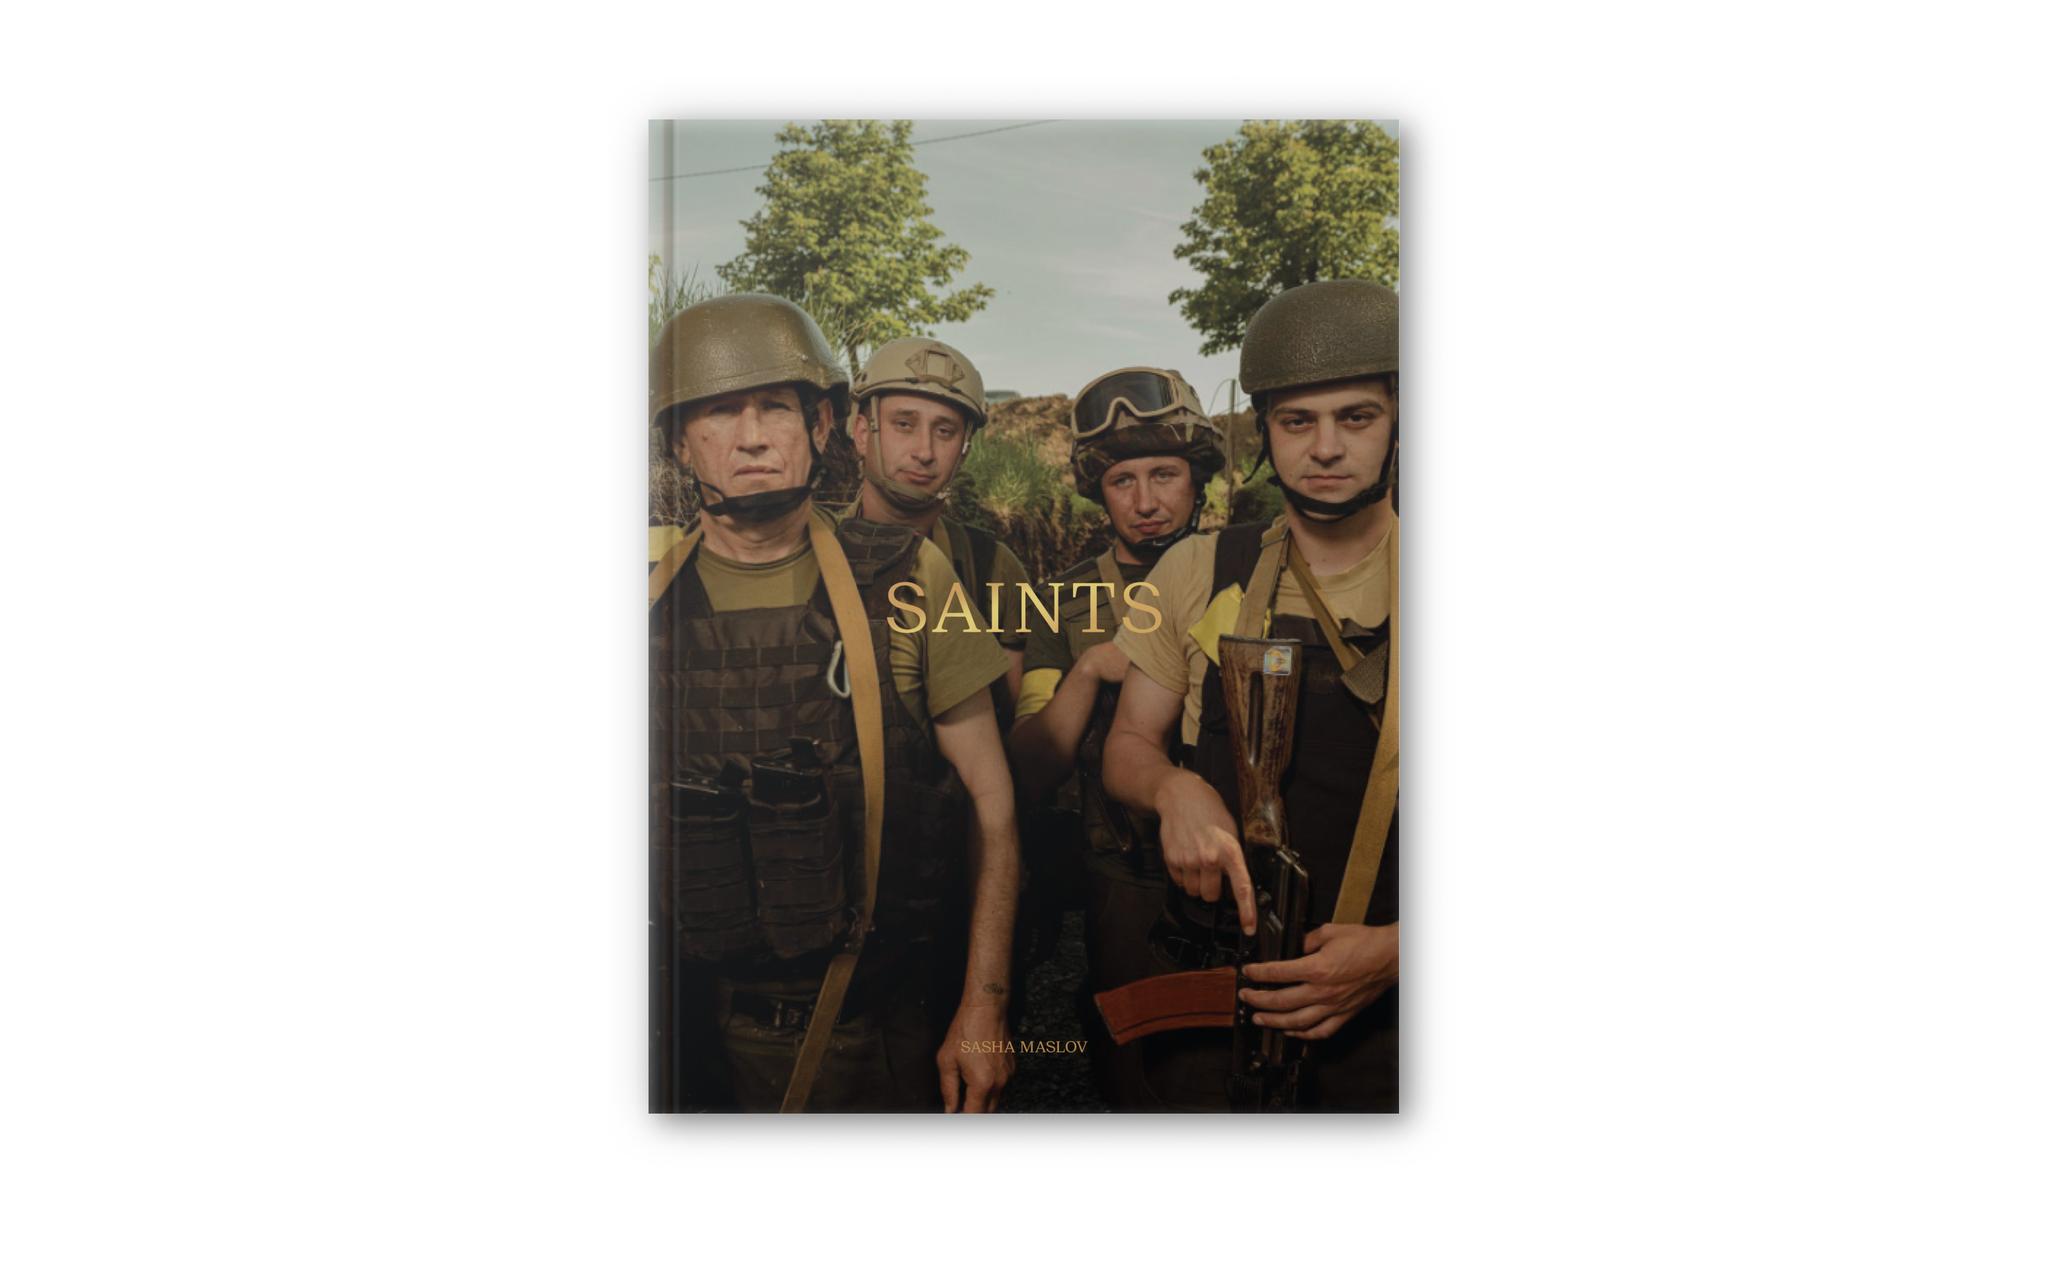 Saint Javelin and Sasha Maslov have created a photobook featuring stories of soldiers